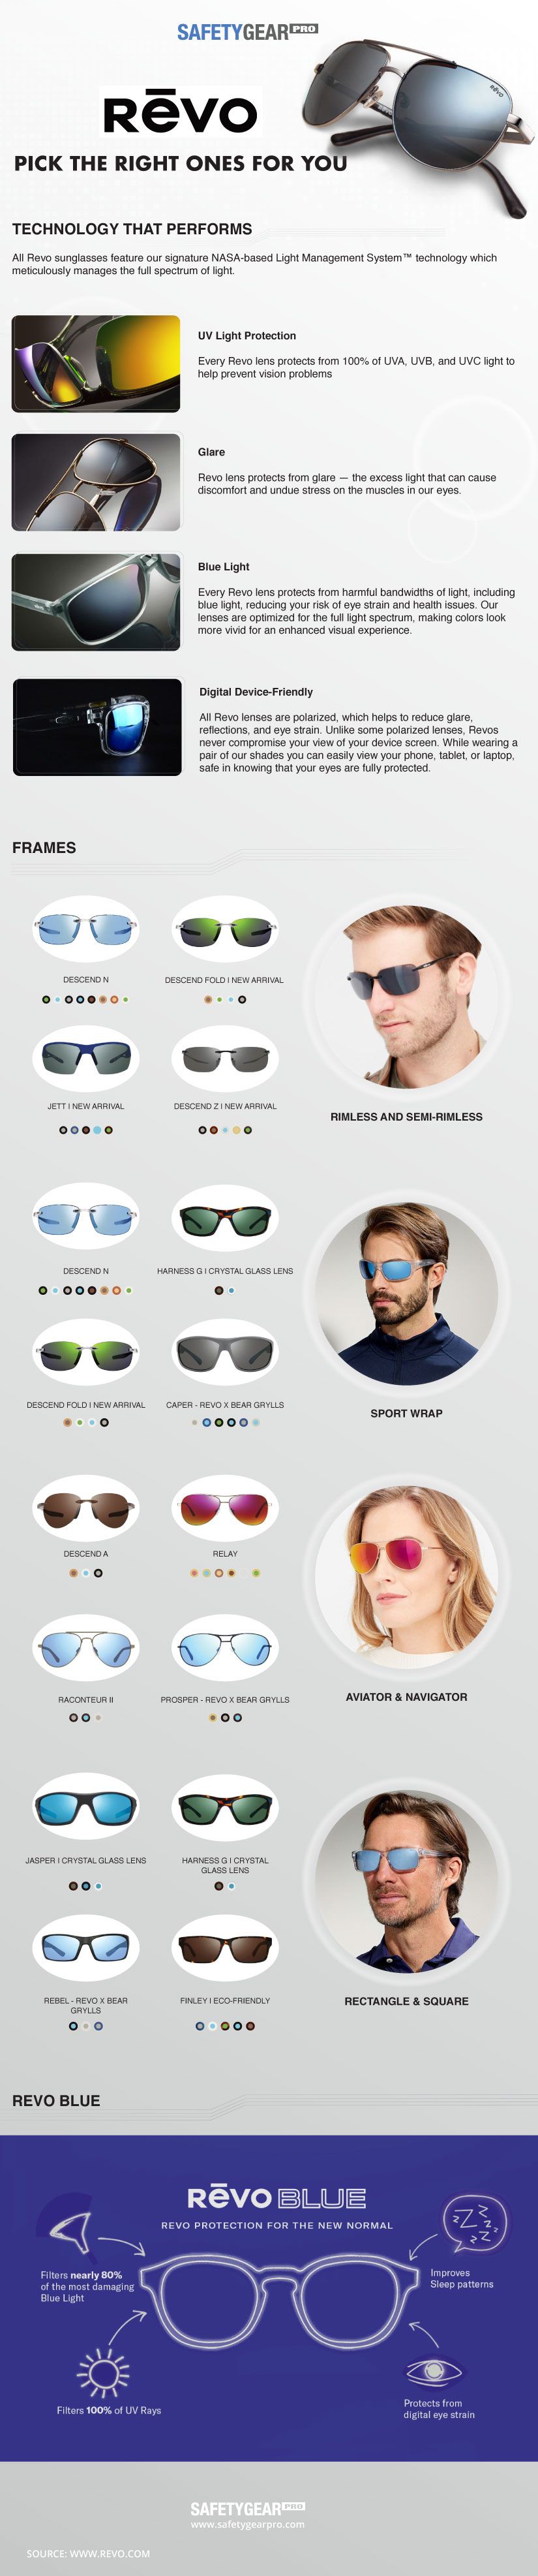 How To Buy the Perfect Pair of Revo Sunglasses Infographic